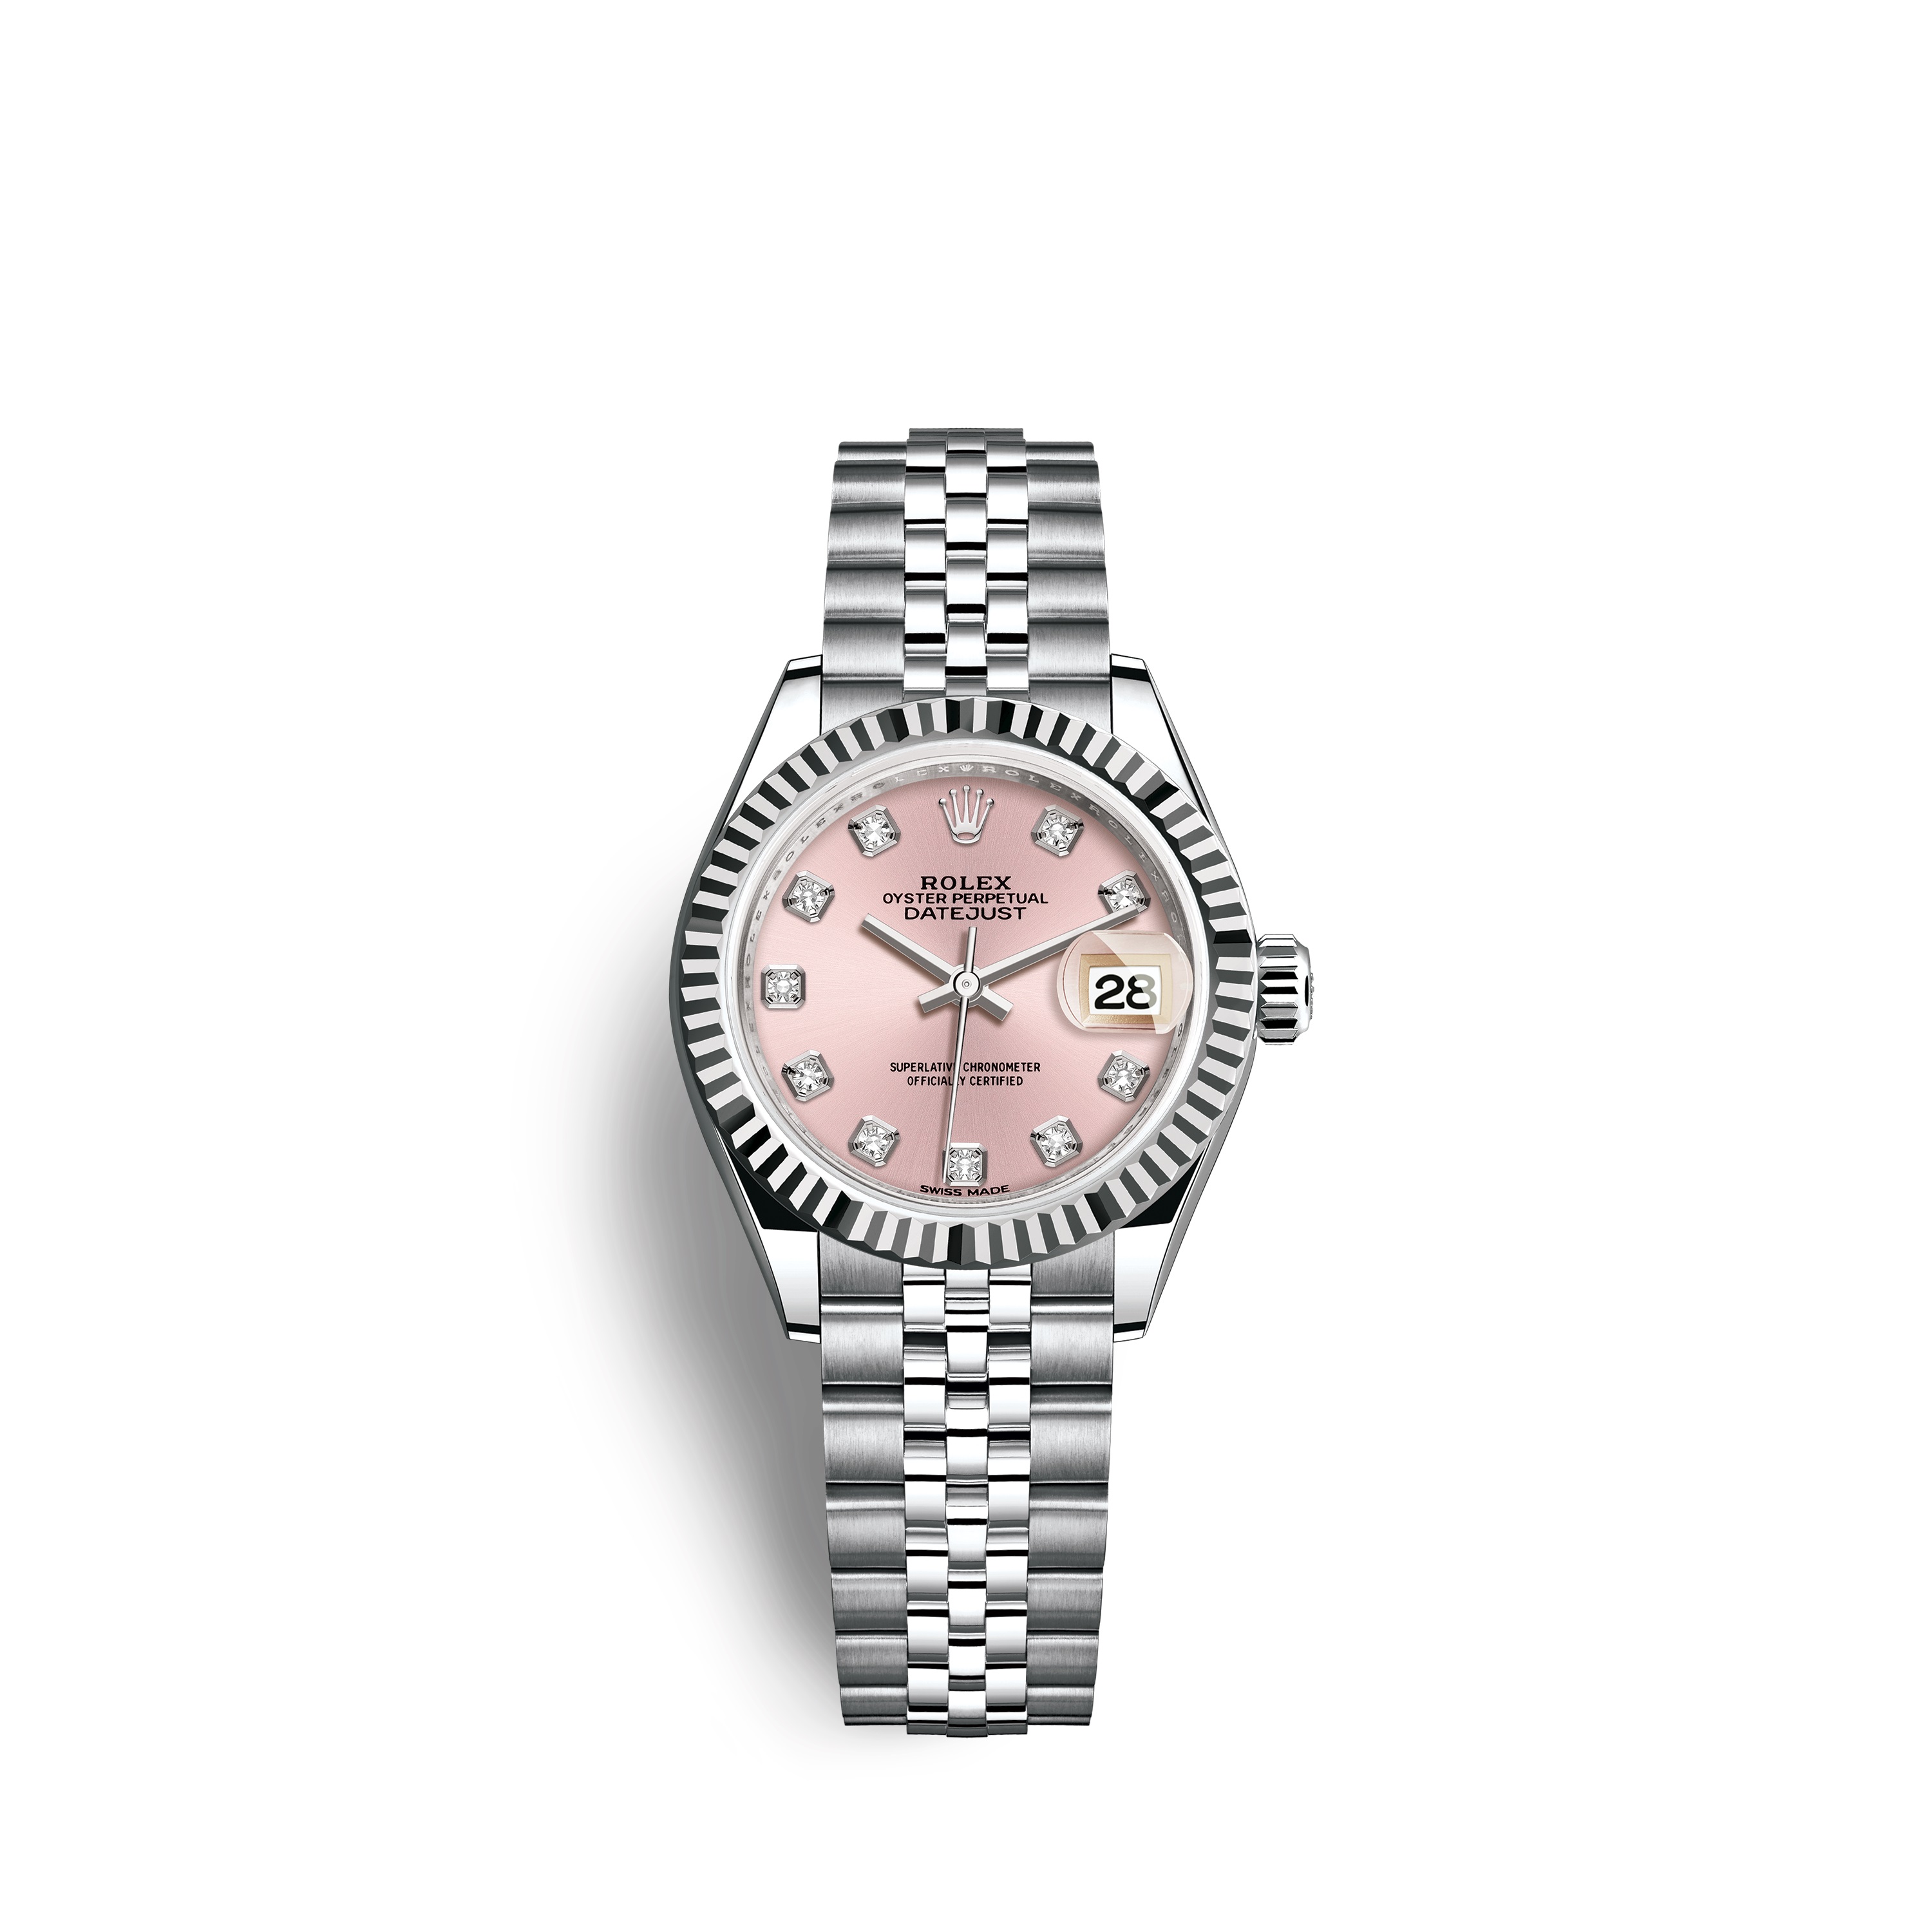 Lady-Datejust 28 279174 White Gold & Stainless Steel Watch (Pink Set with Diamonds)